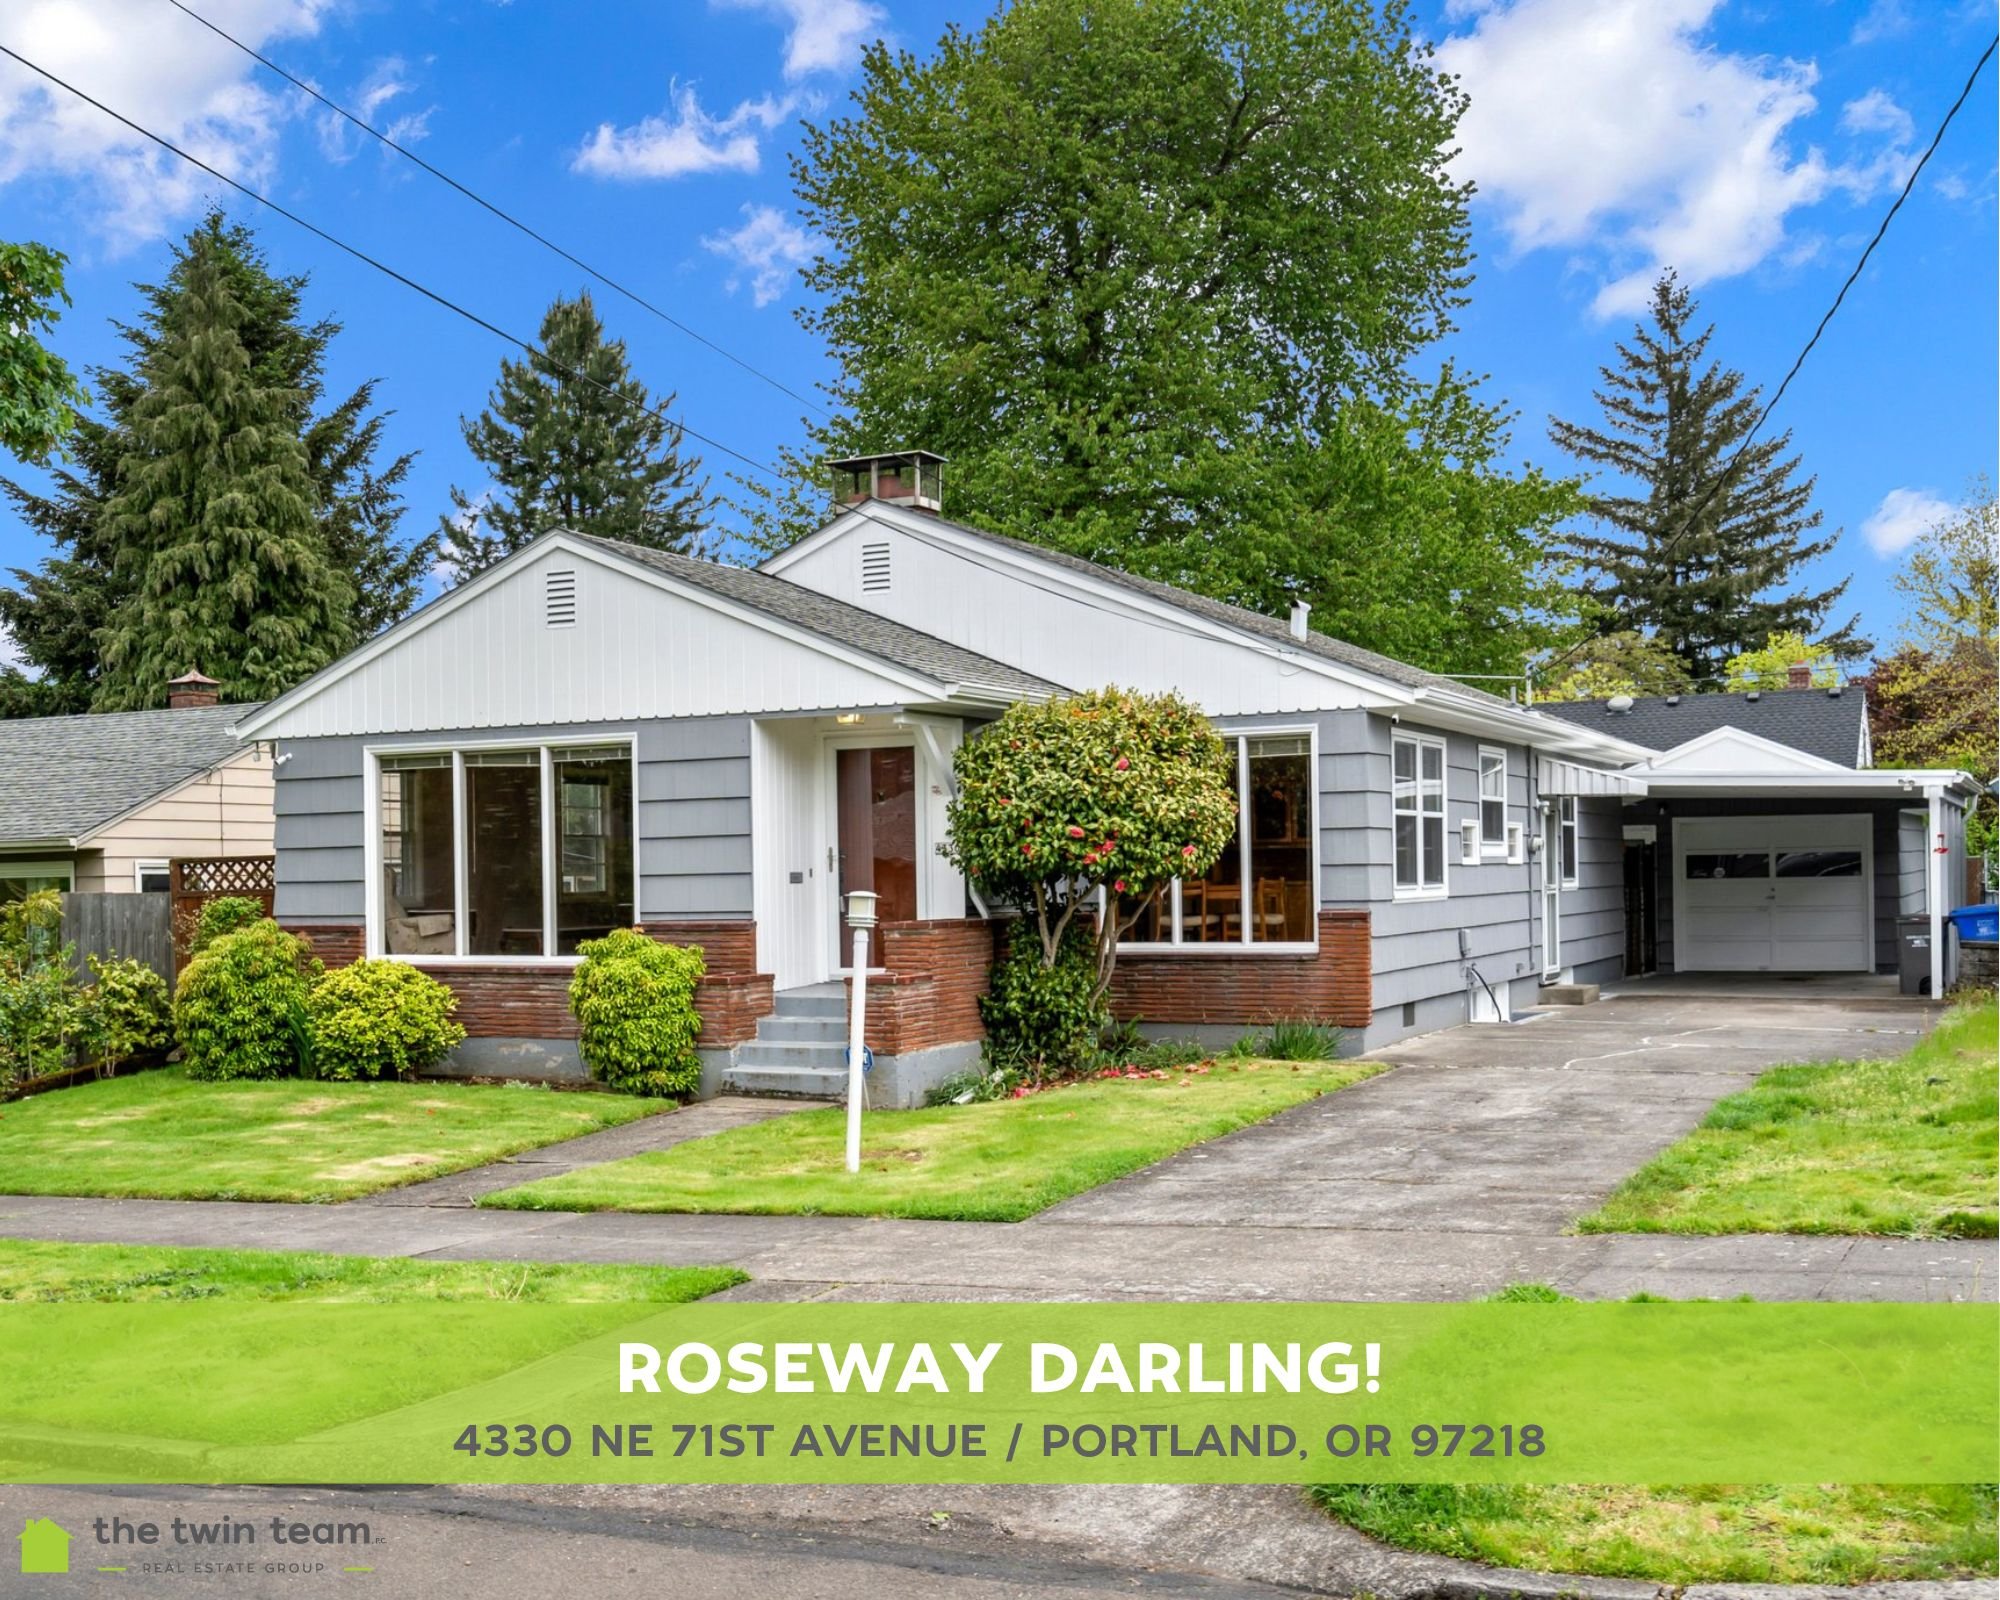 JUST LISTED!!
📍4330 NE 71st Avenue, Portland, OR 97218
🛏 3 Beds
🛁 1 Baths
📐 2374 Sq Ft
💰 $475,000

Light-filled &amp; loaded with 1950's vibes! Fall in love with all this home has to offer! The quaint entry opens to a grand-sized living room off